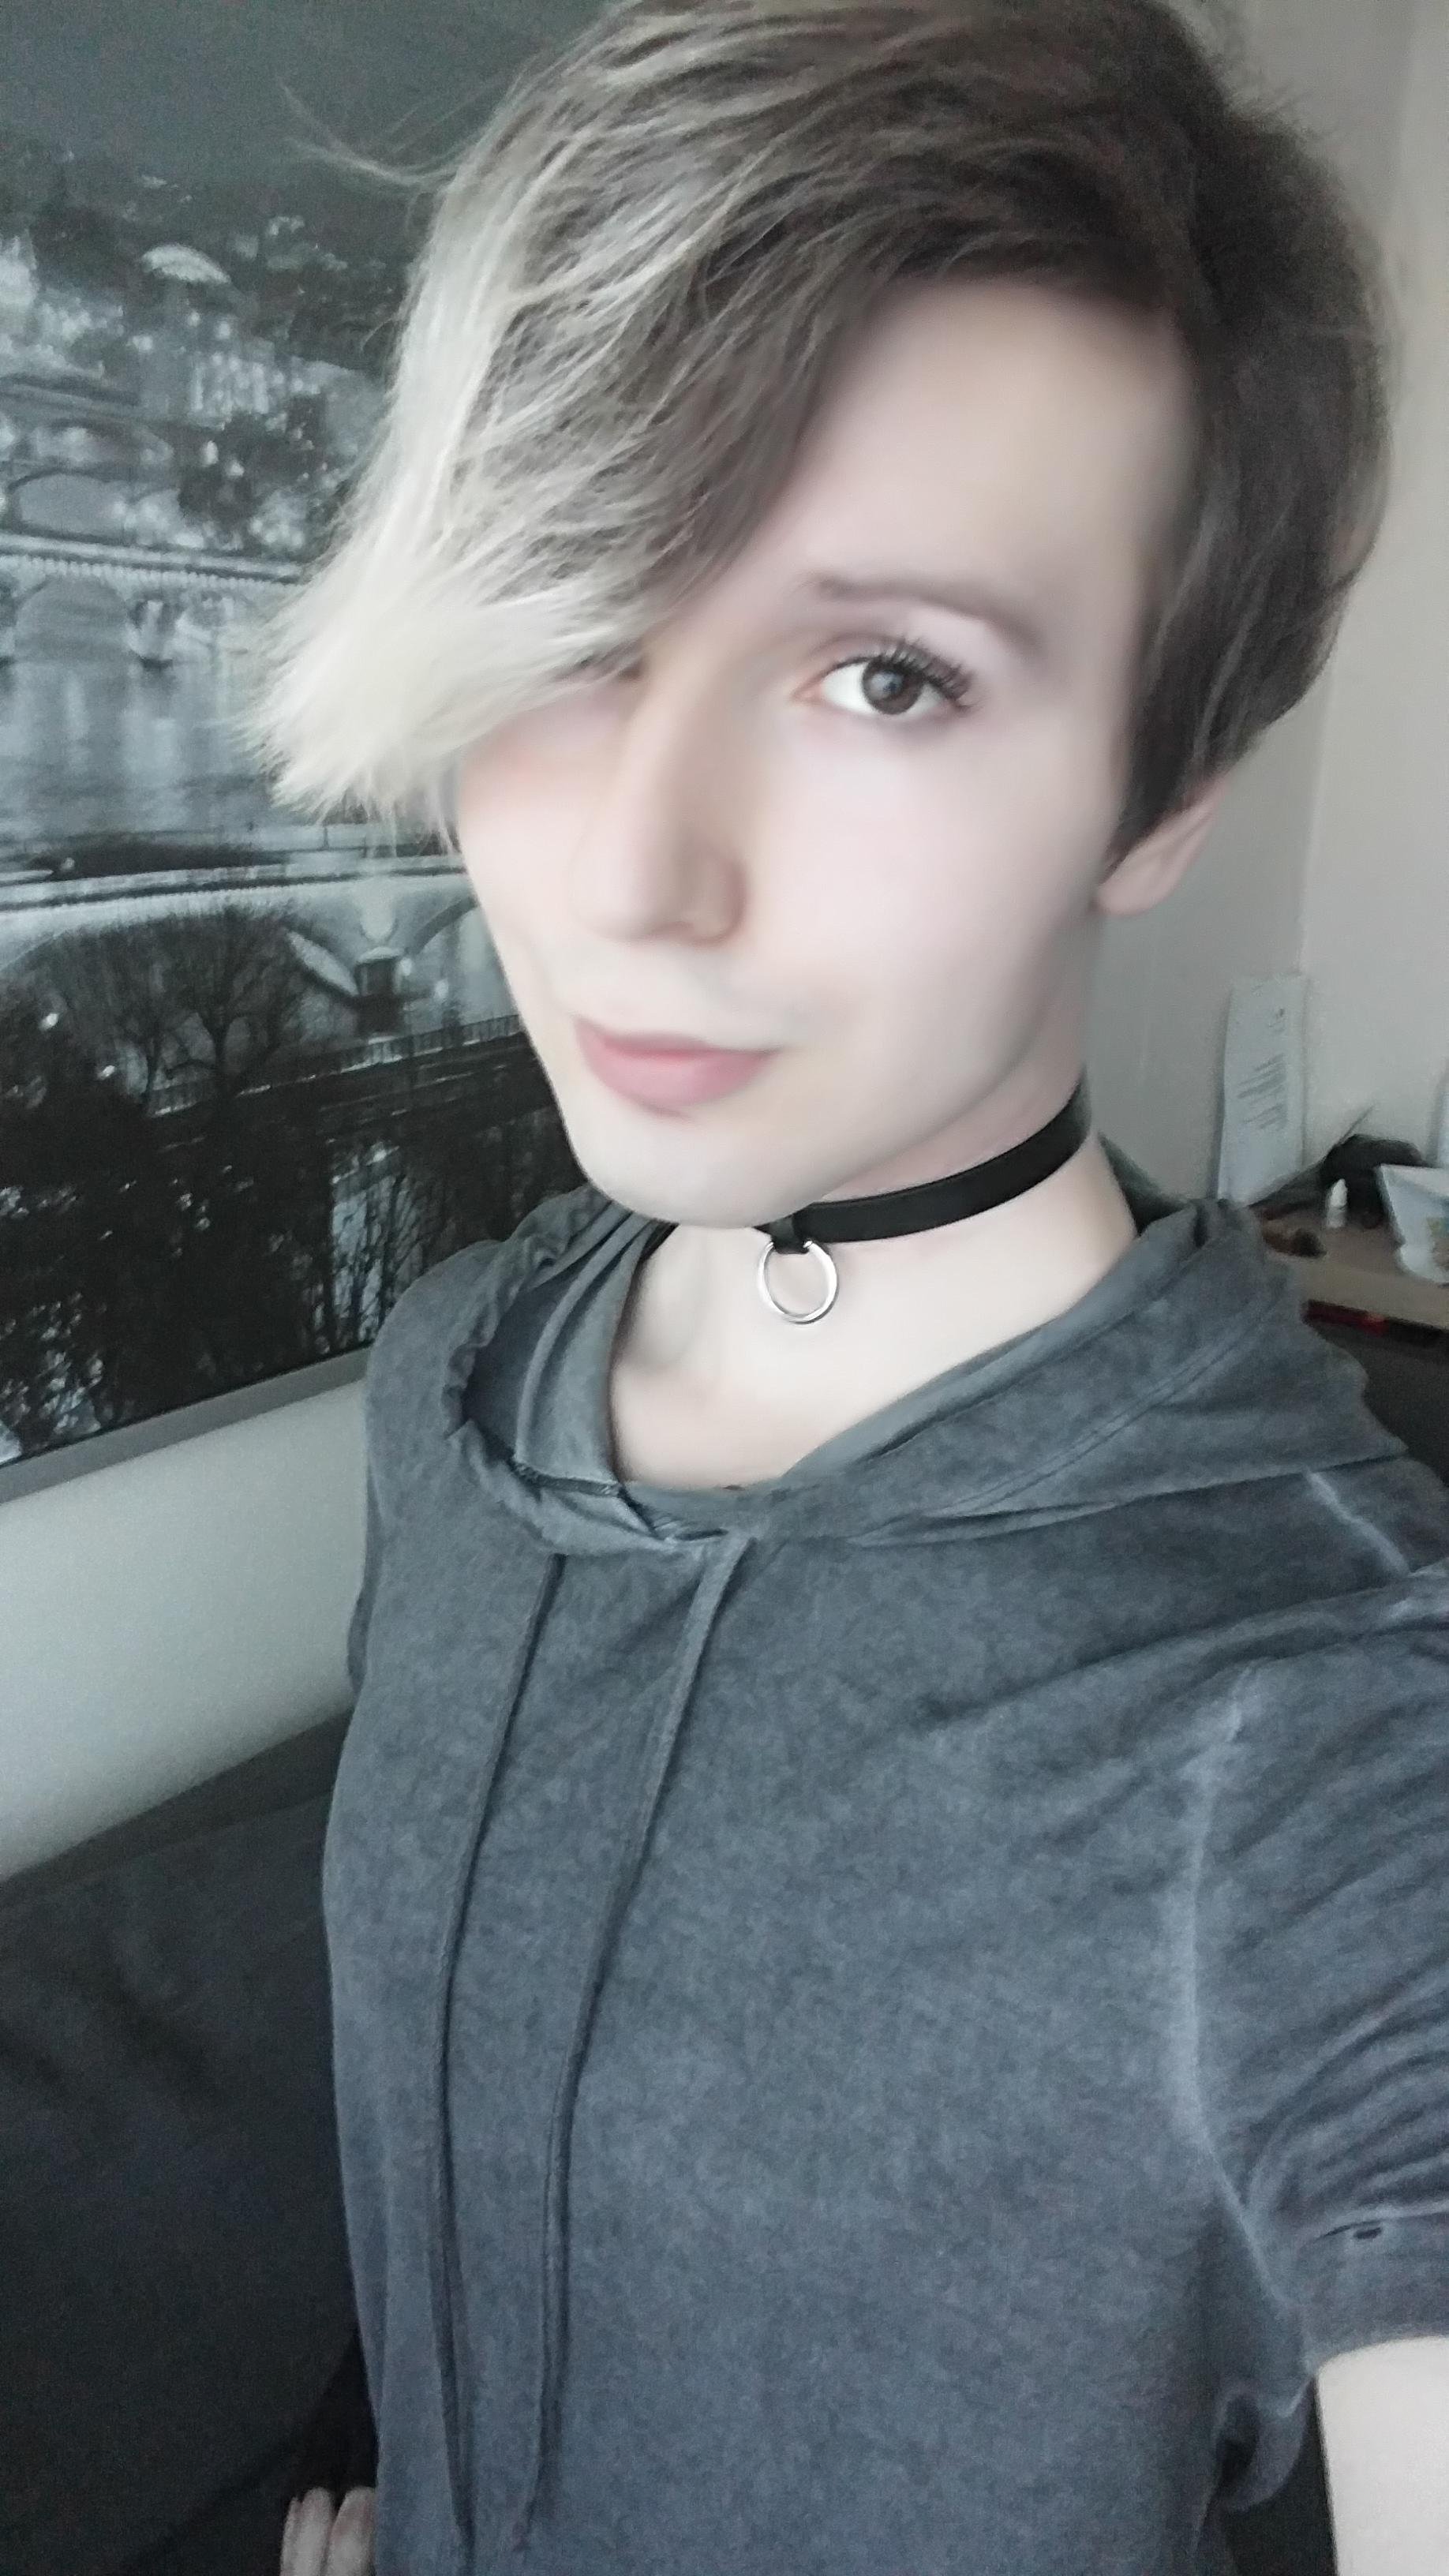 Had a haircut, how's it looking?